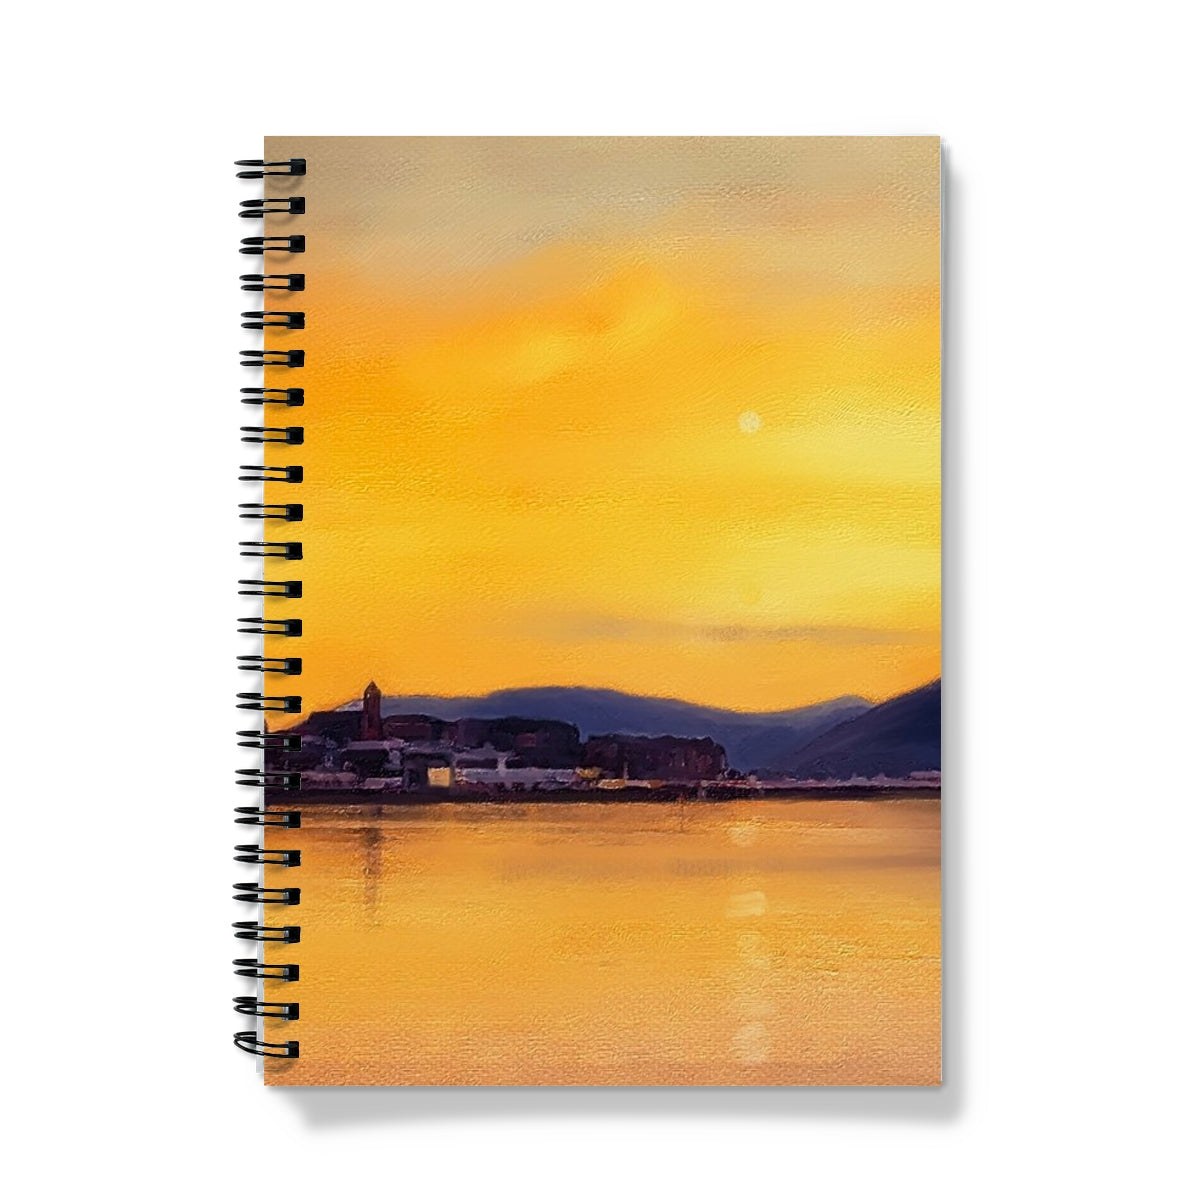 Gourock From Cardwell Bay Art Gifts Notebook-Journals & Notebooks-River Clyde Art Gallery-A5-Graph-Paintings, Prints, Homeware, Art Gifts From Scotland By Scottish Artist Kevin Hunter